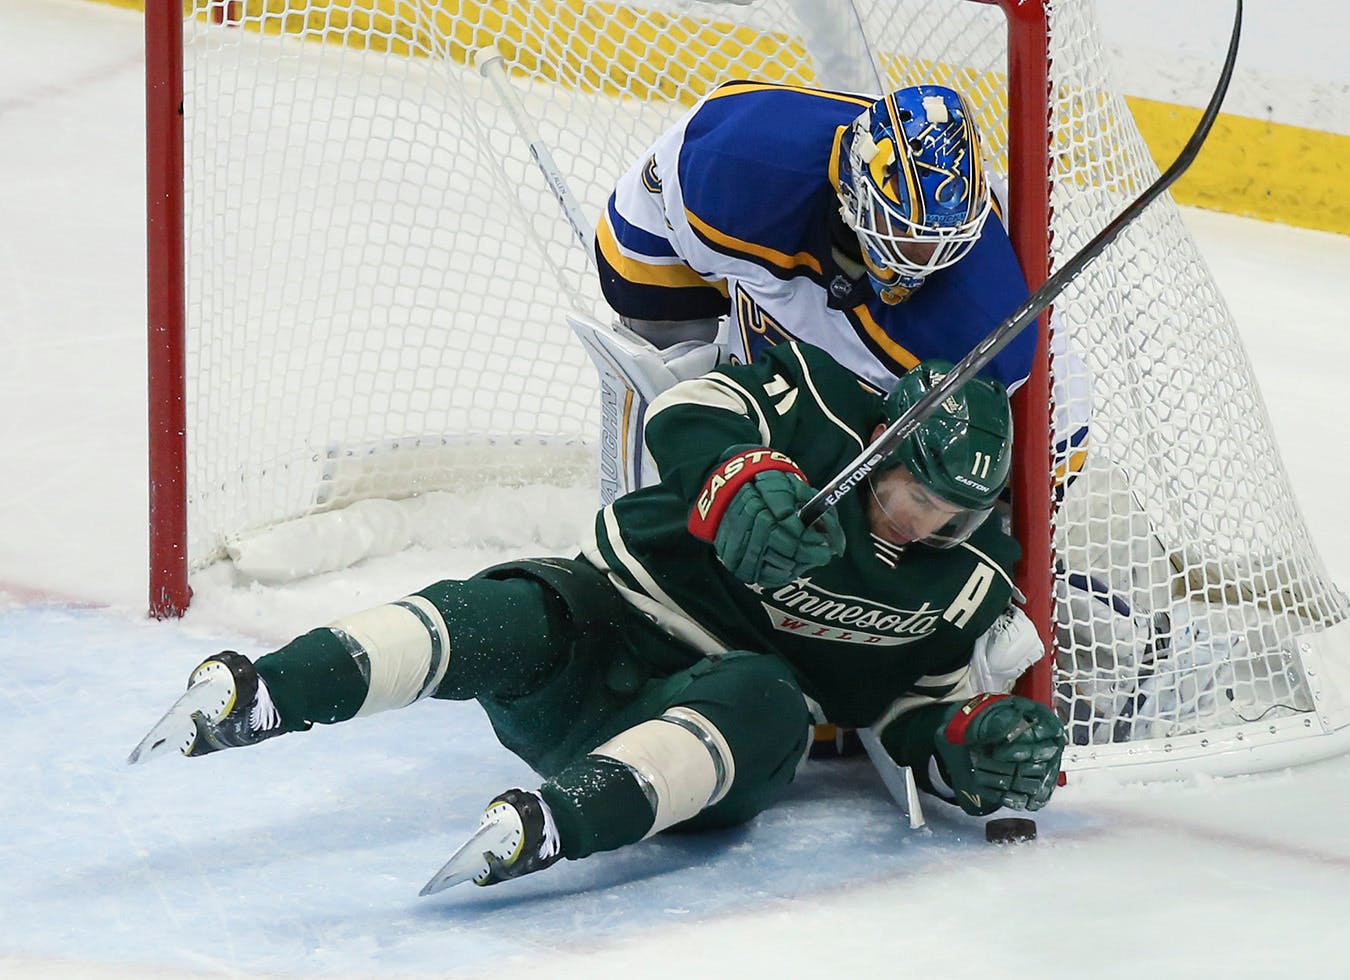 The Wild came out flat, didn't contest shots and got unusually poor goaltending.